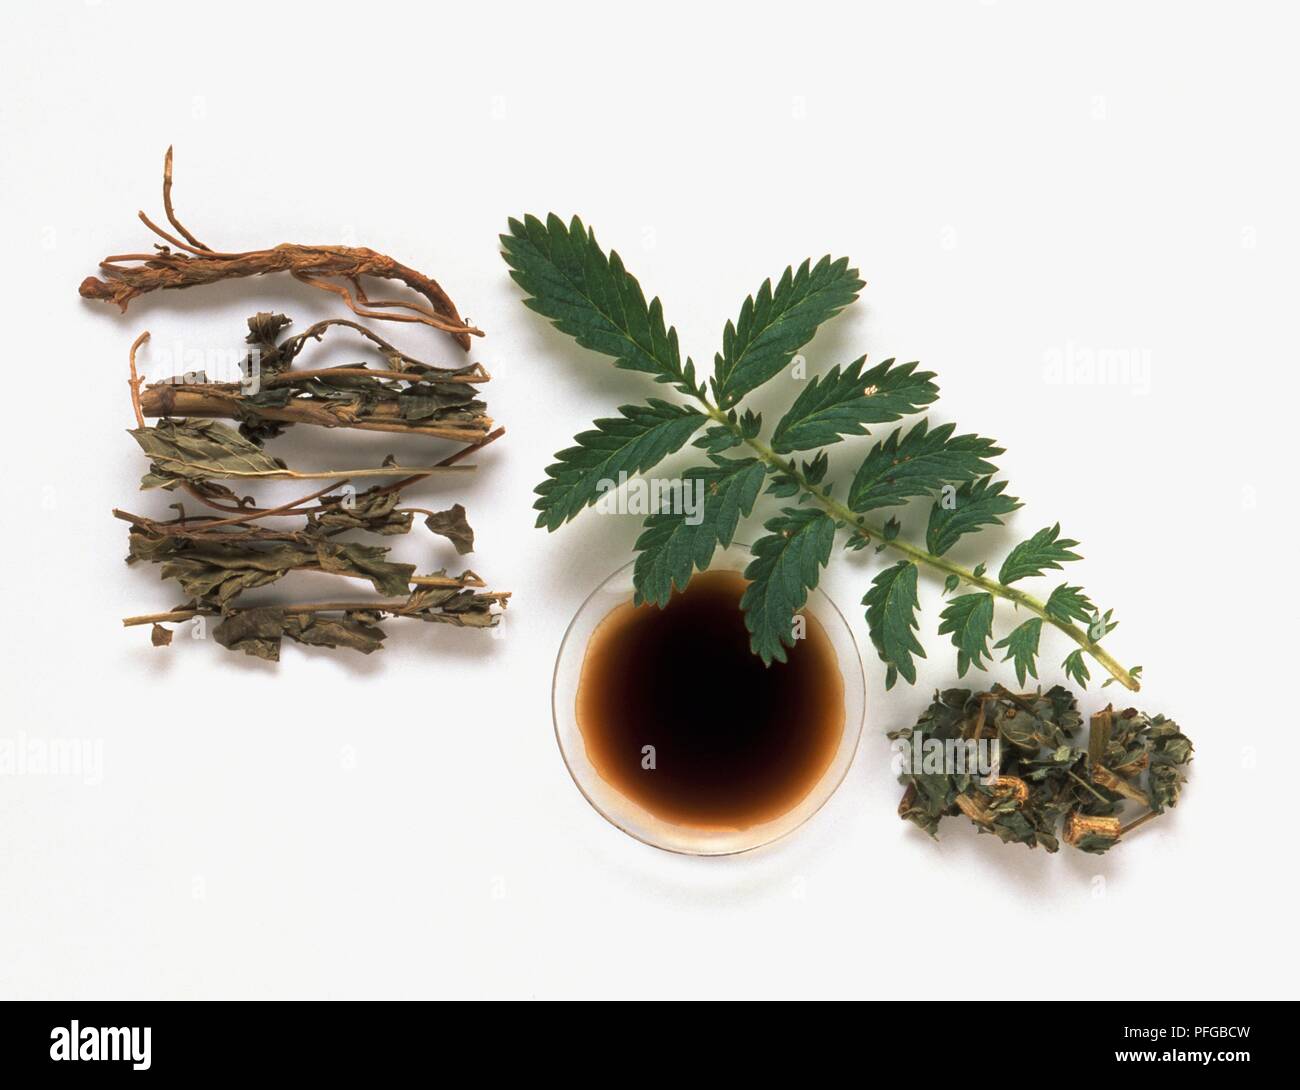 Fresh leaves, dried leaves and tincture from Agrimonia eupatoria, and dried stems and leaves from Agrimonia pilosa (Agrimony) Stock Photo